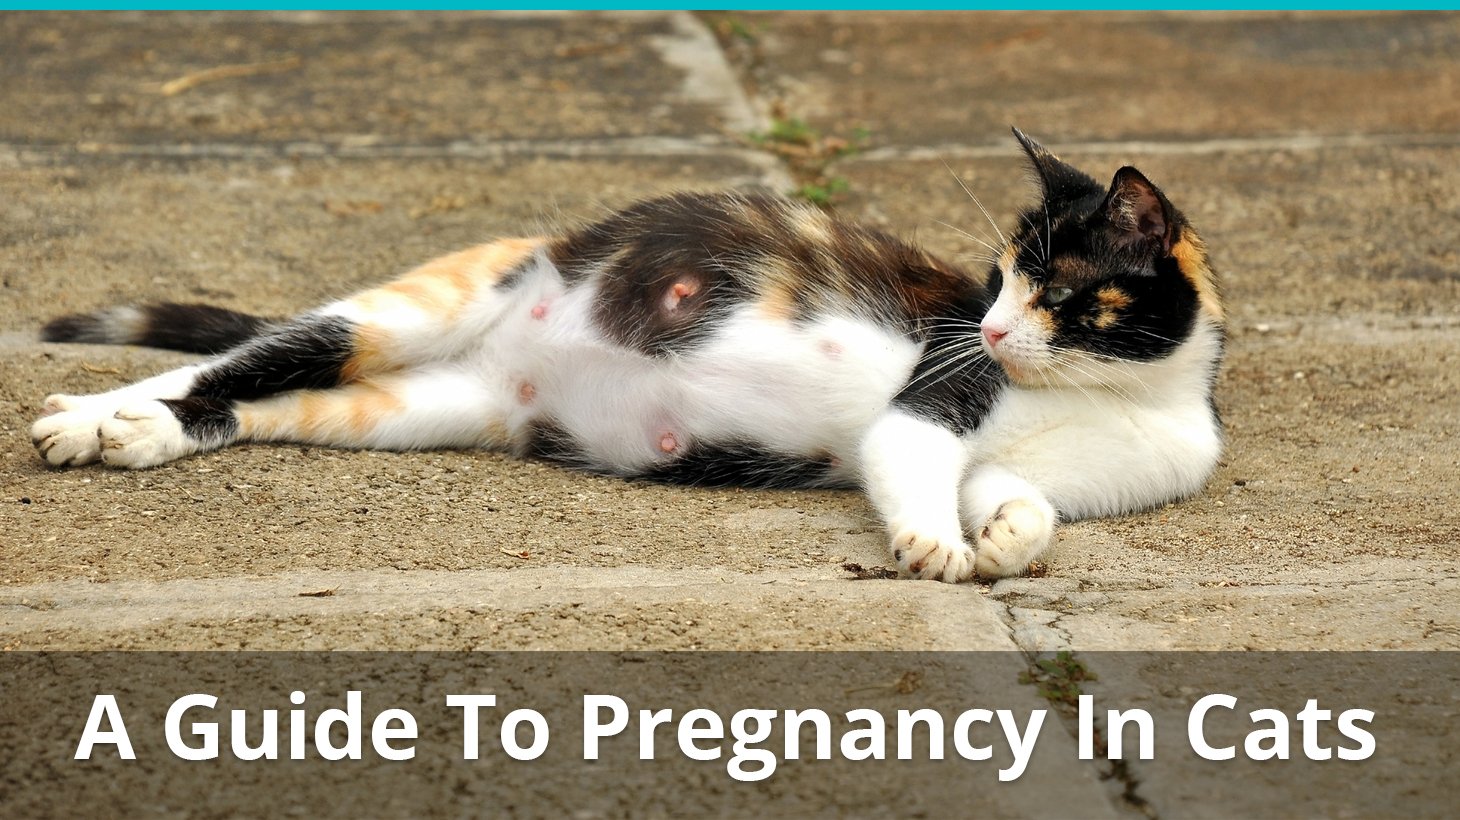 how to tell how far pregnant my cat is